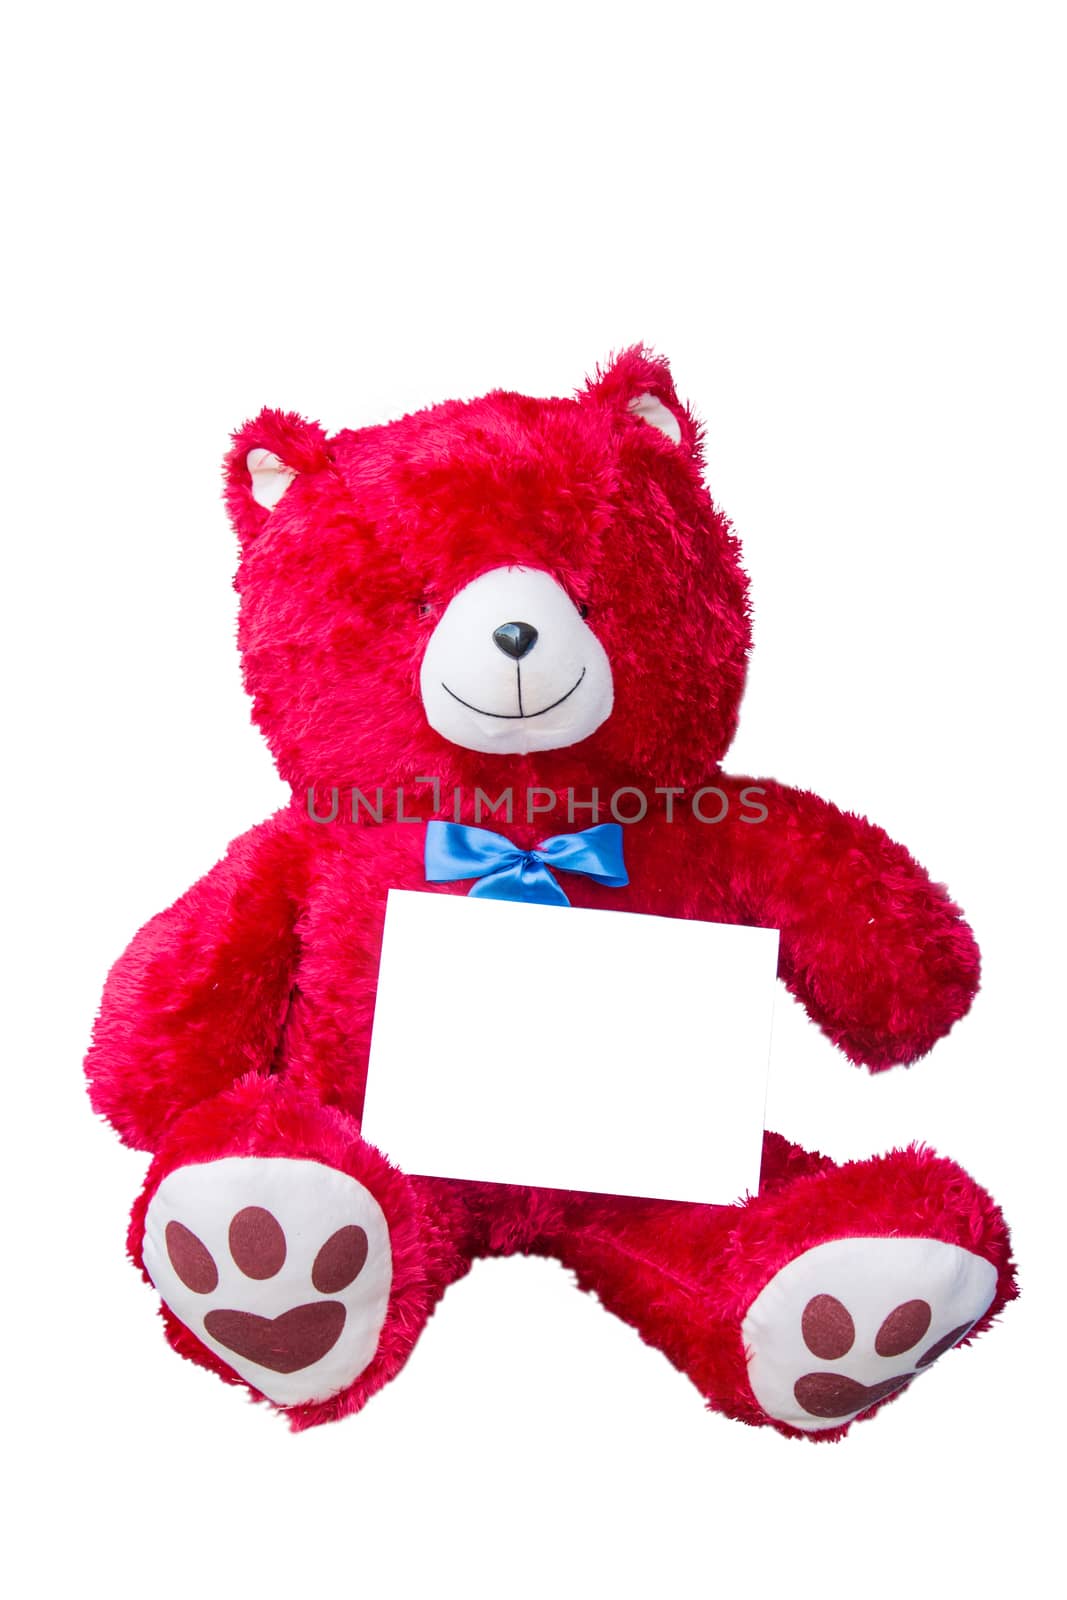 A red bear doll and blue ribbon with white paper on isolated white background